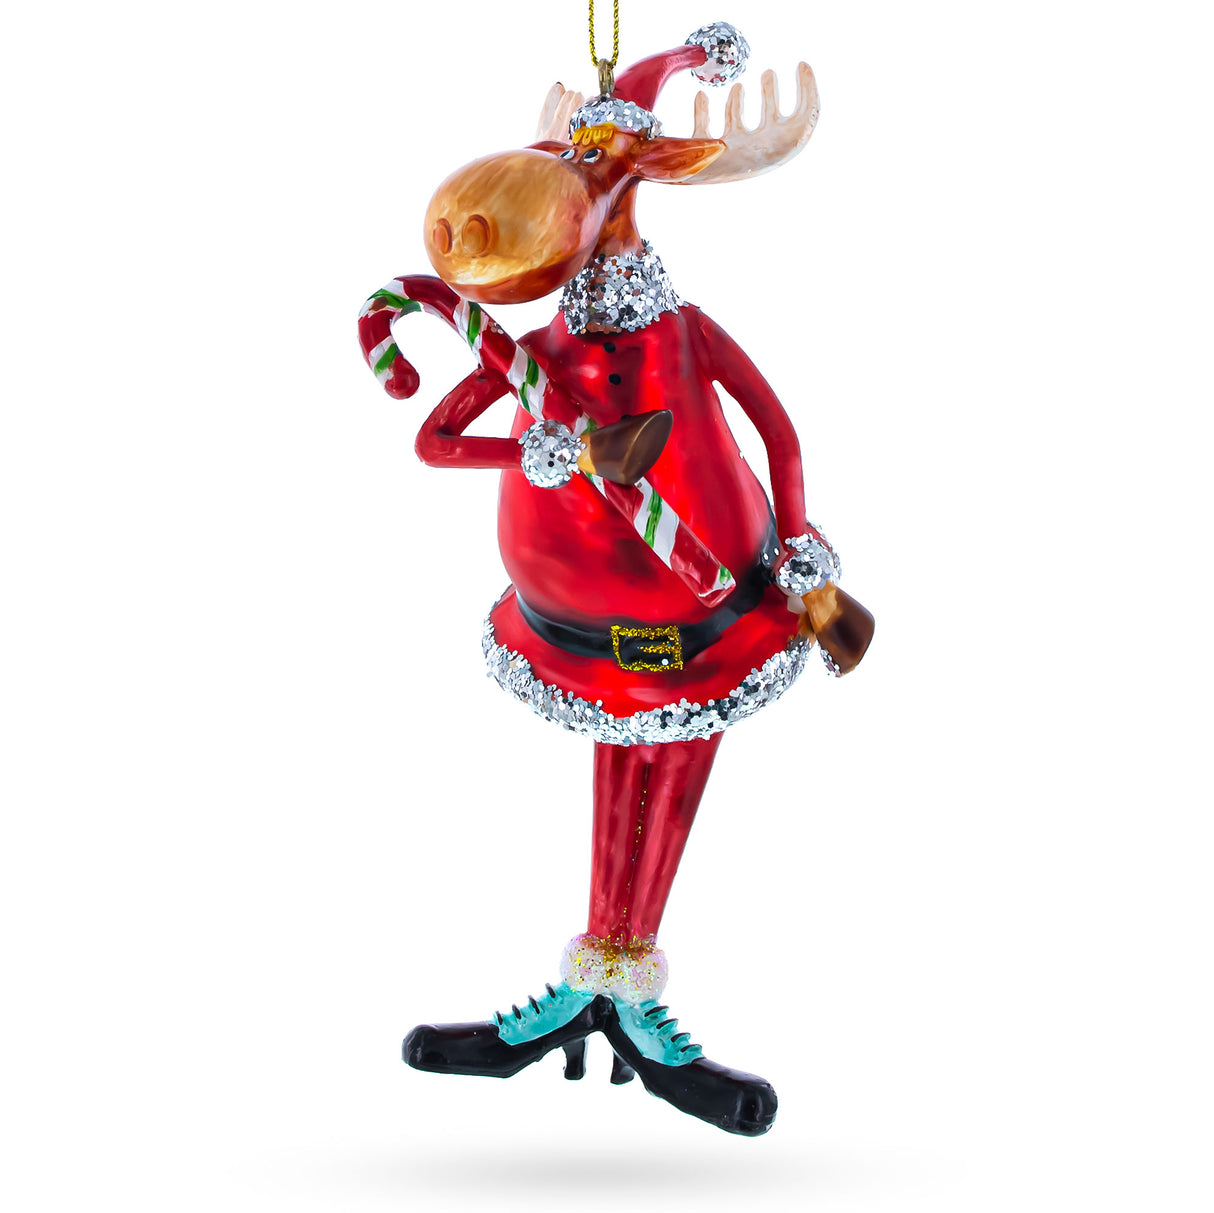 Glass Cheerful Chubby Moose with Candy Cane - Jolly Blown Glass Christmas Ornament in Red color